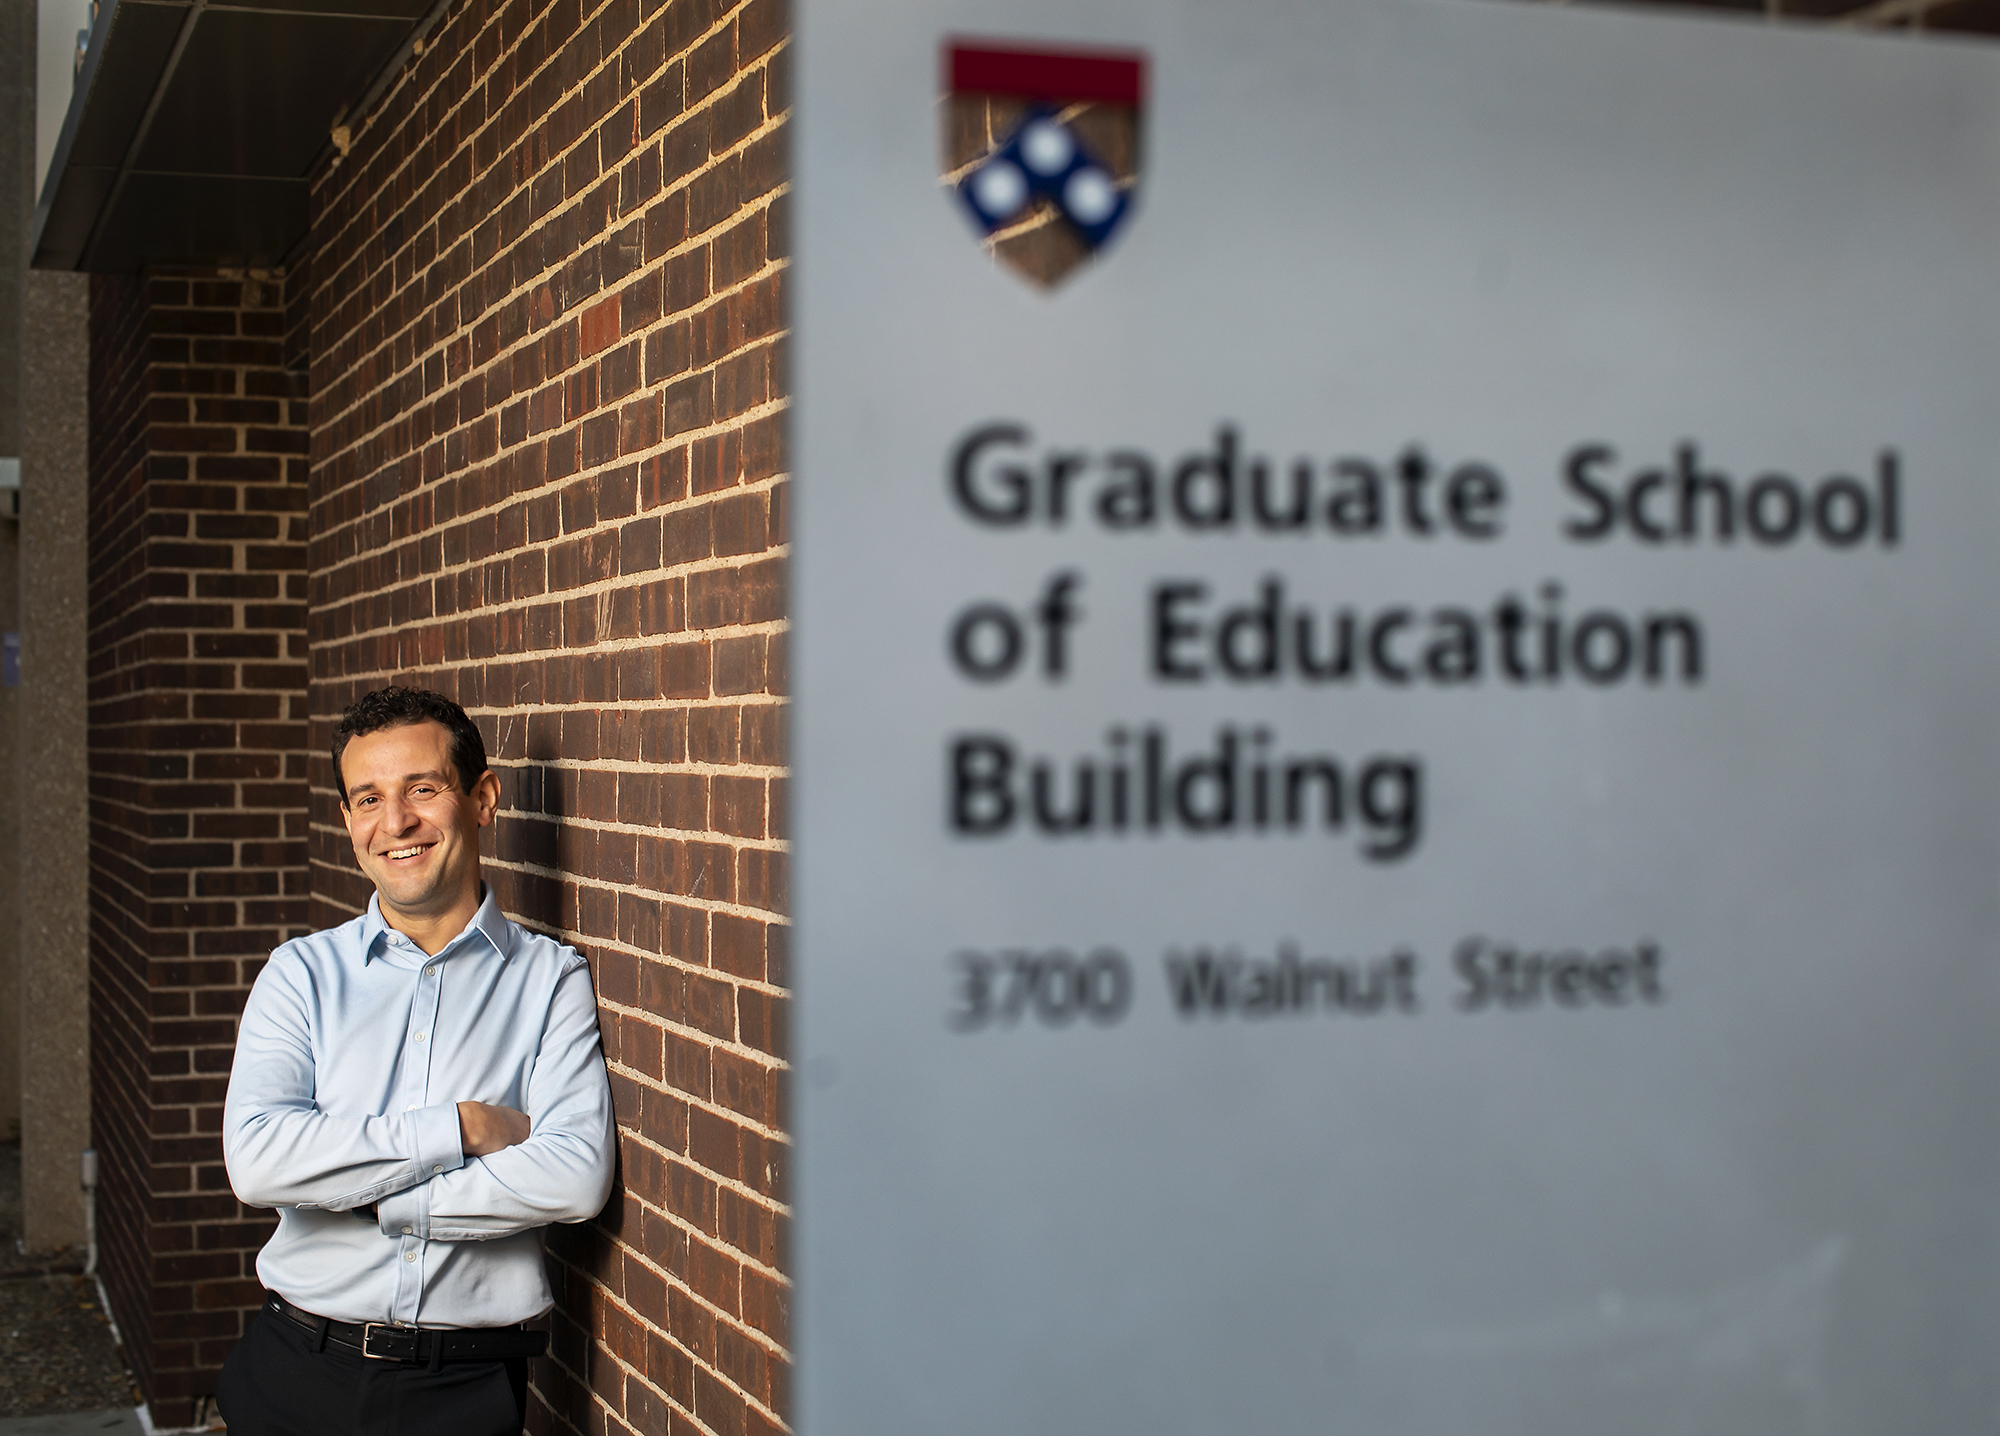 professor standing next to brick wall with Graduate School of Education Building sign